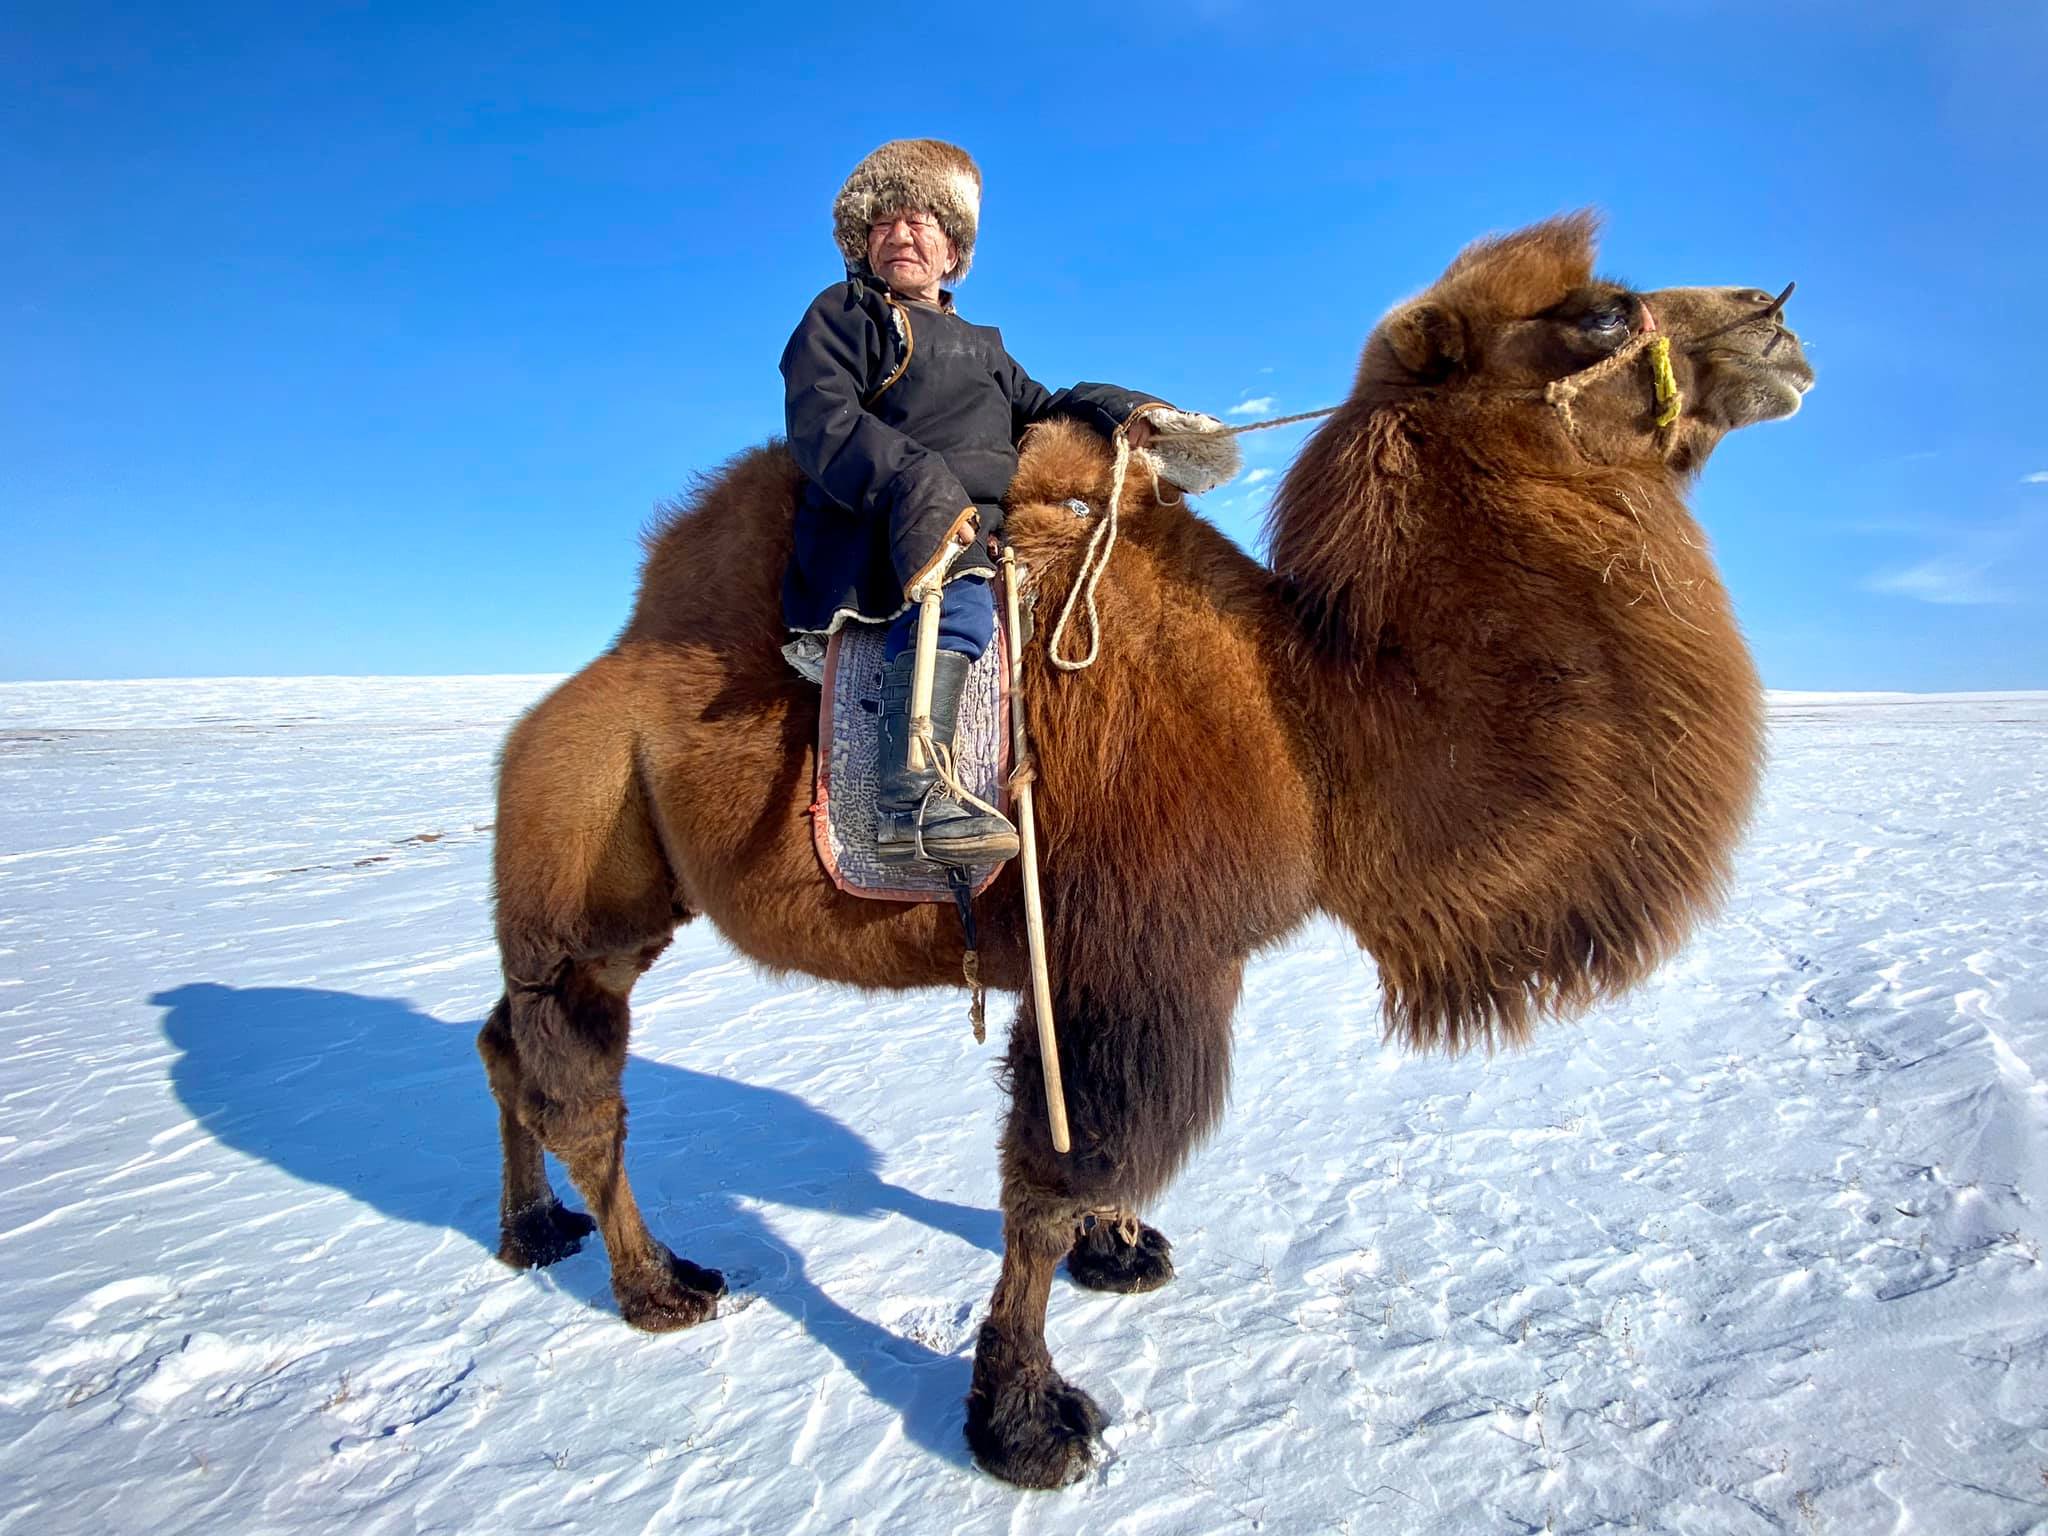 A Mongolian man sits on a bactrian camel, surrounded by snow.